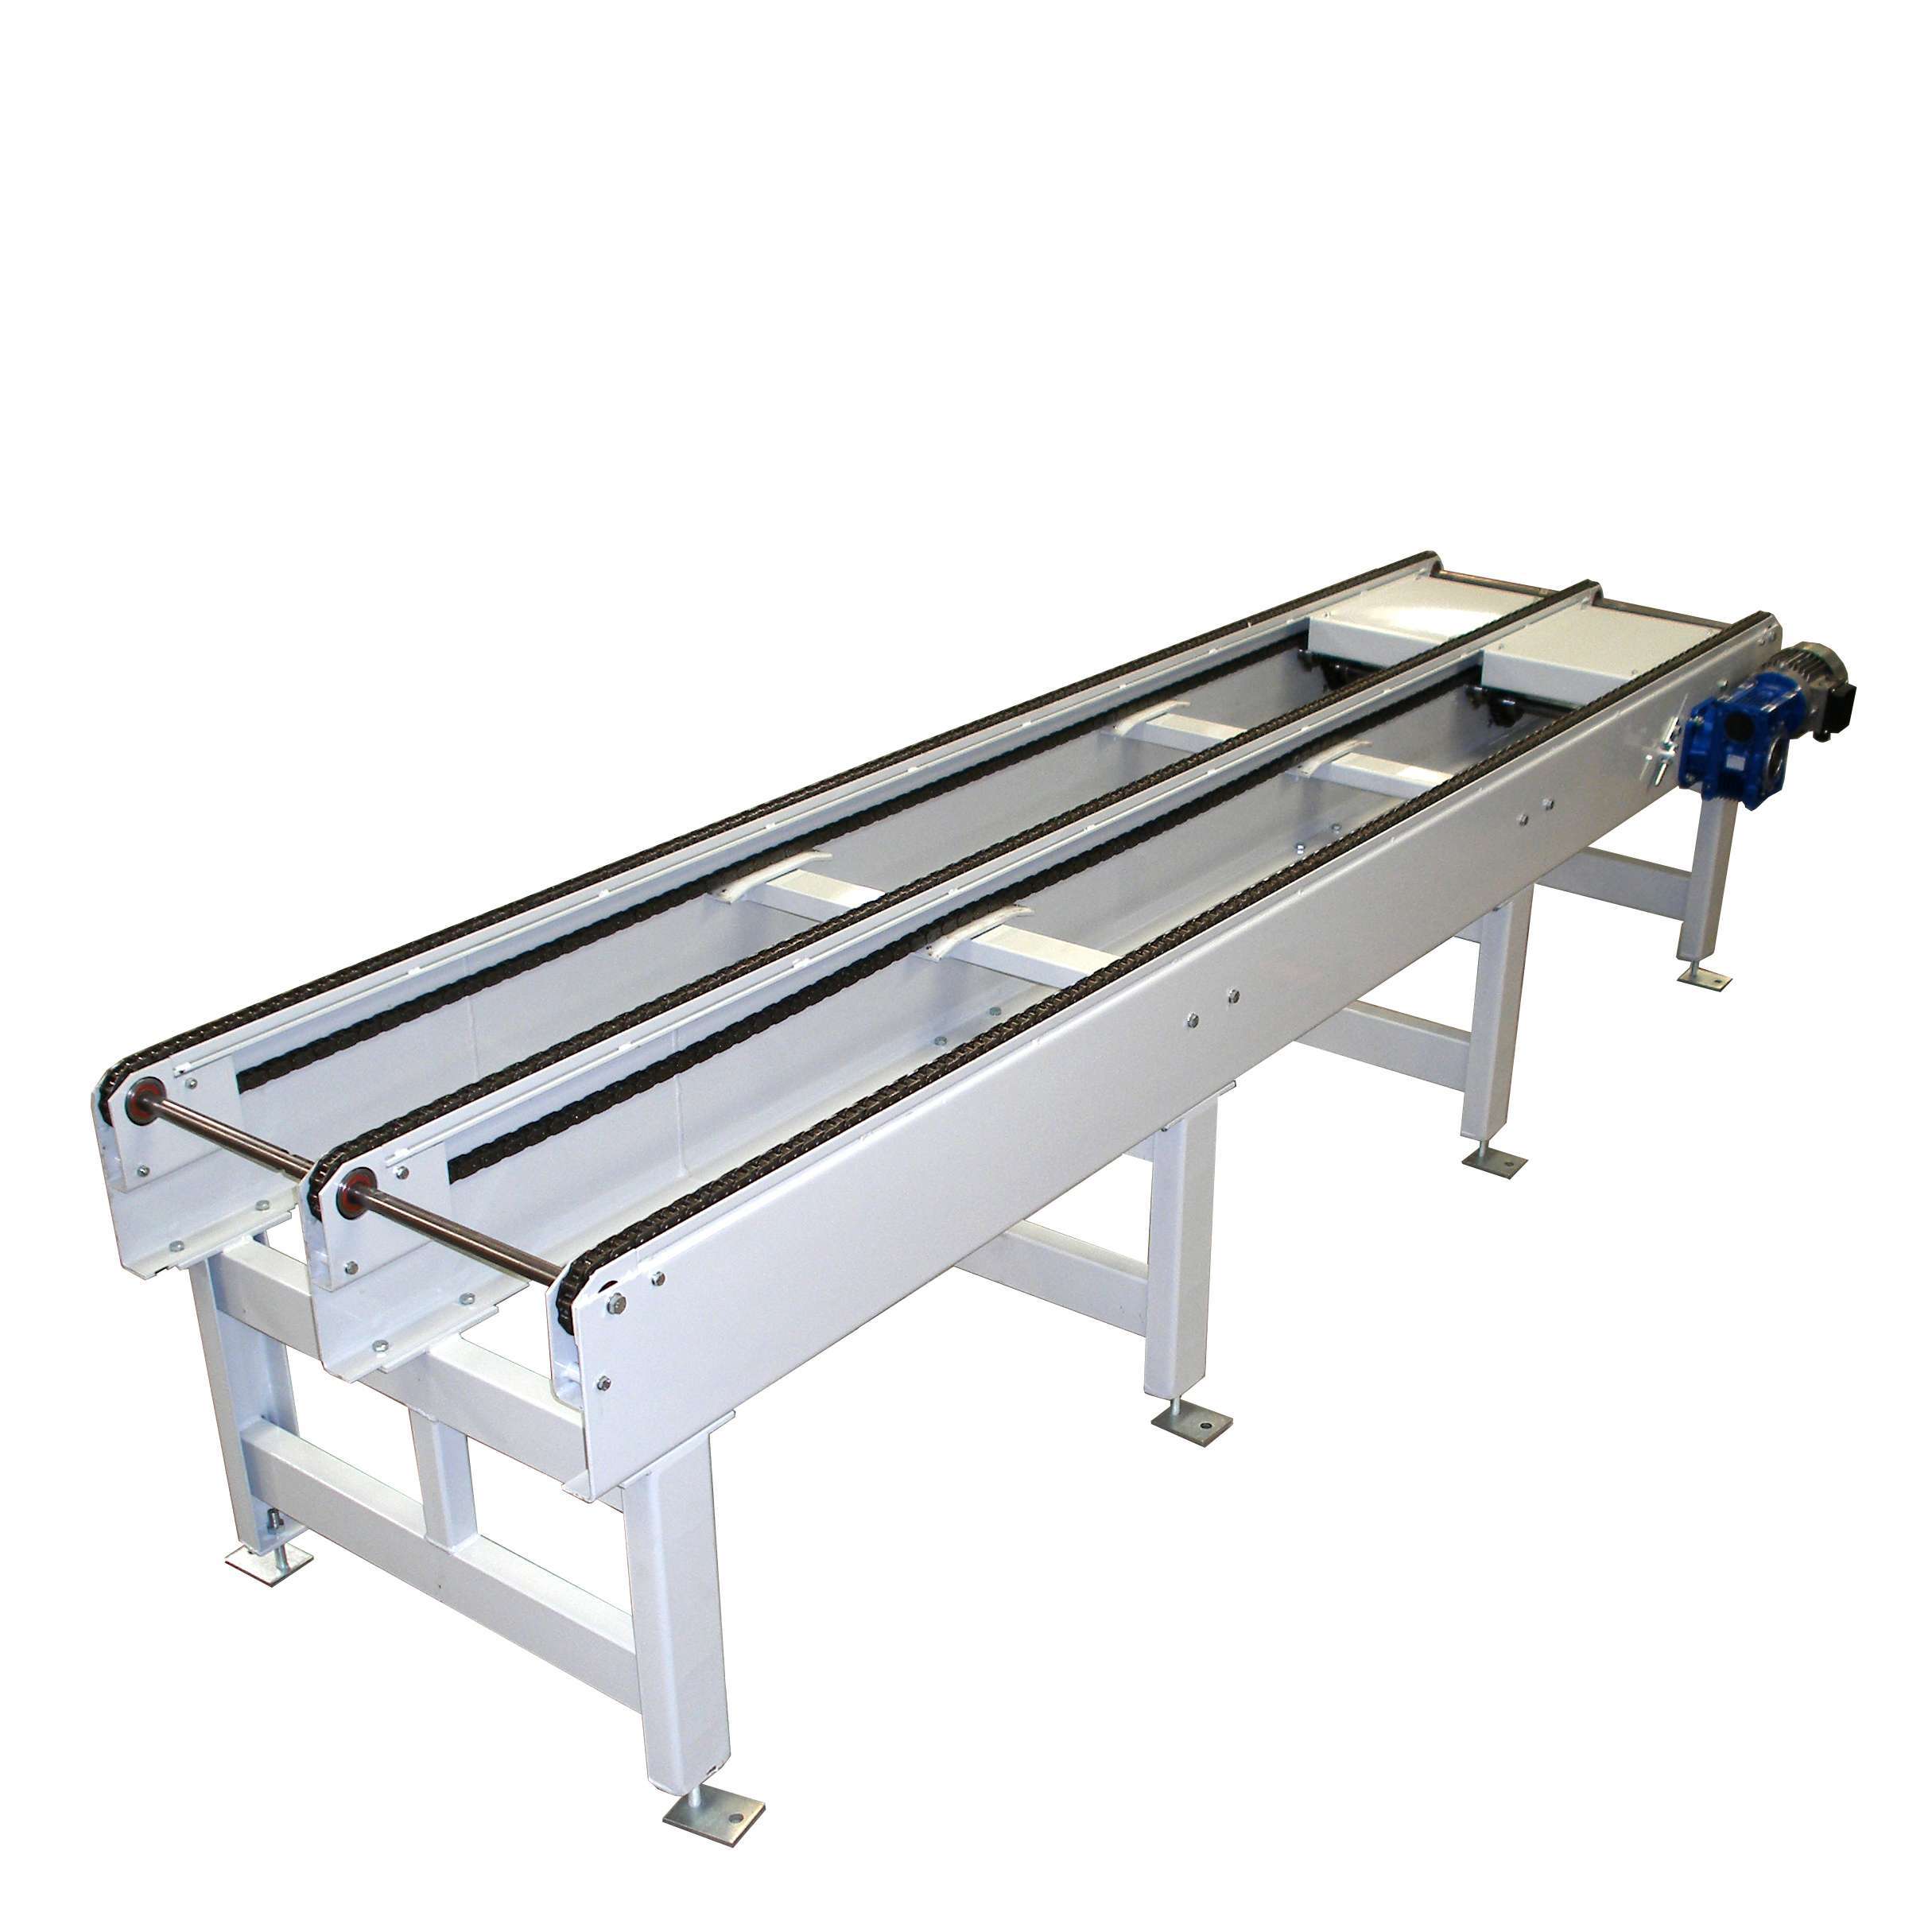 roller conveyors, chain conveyors, turntable, strap conveyor, material lift, Driven and non-driven roller conveyors for light goods Q60/67